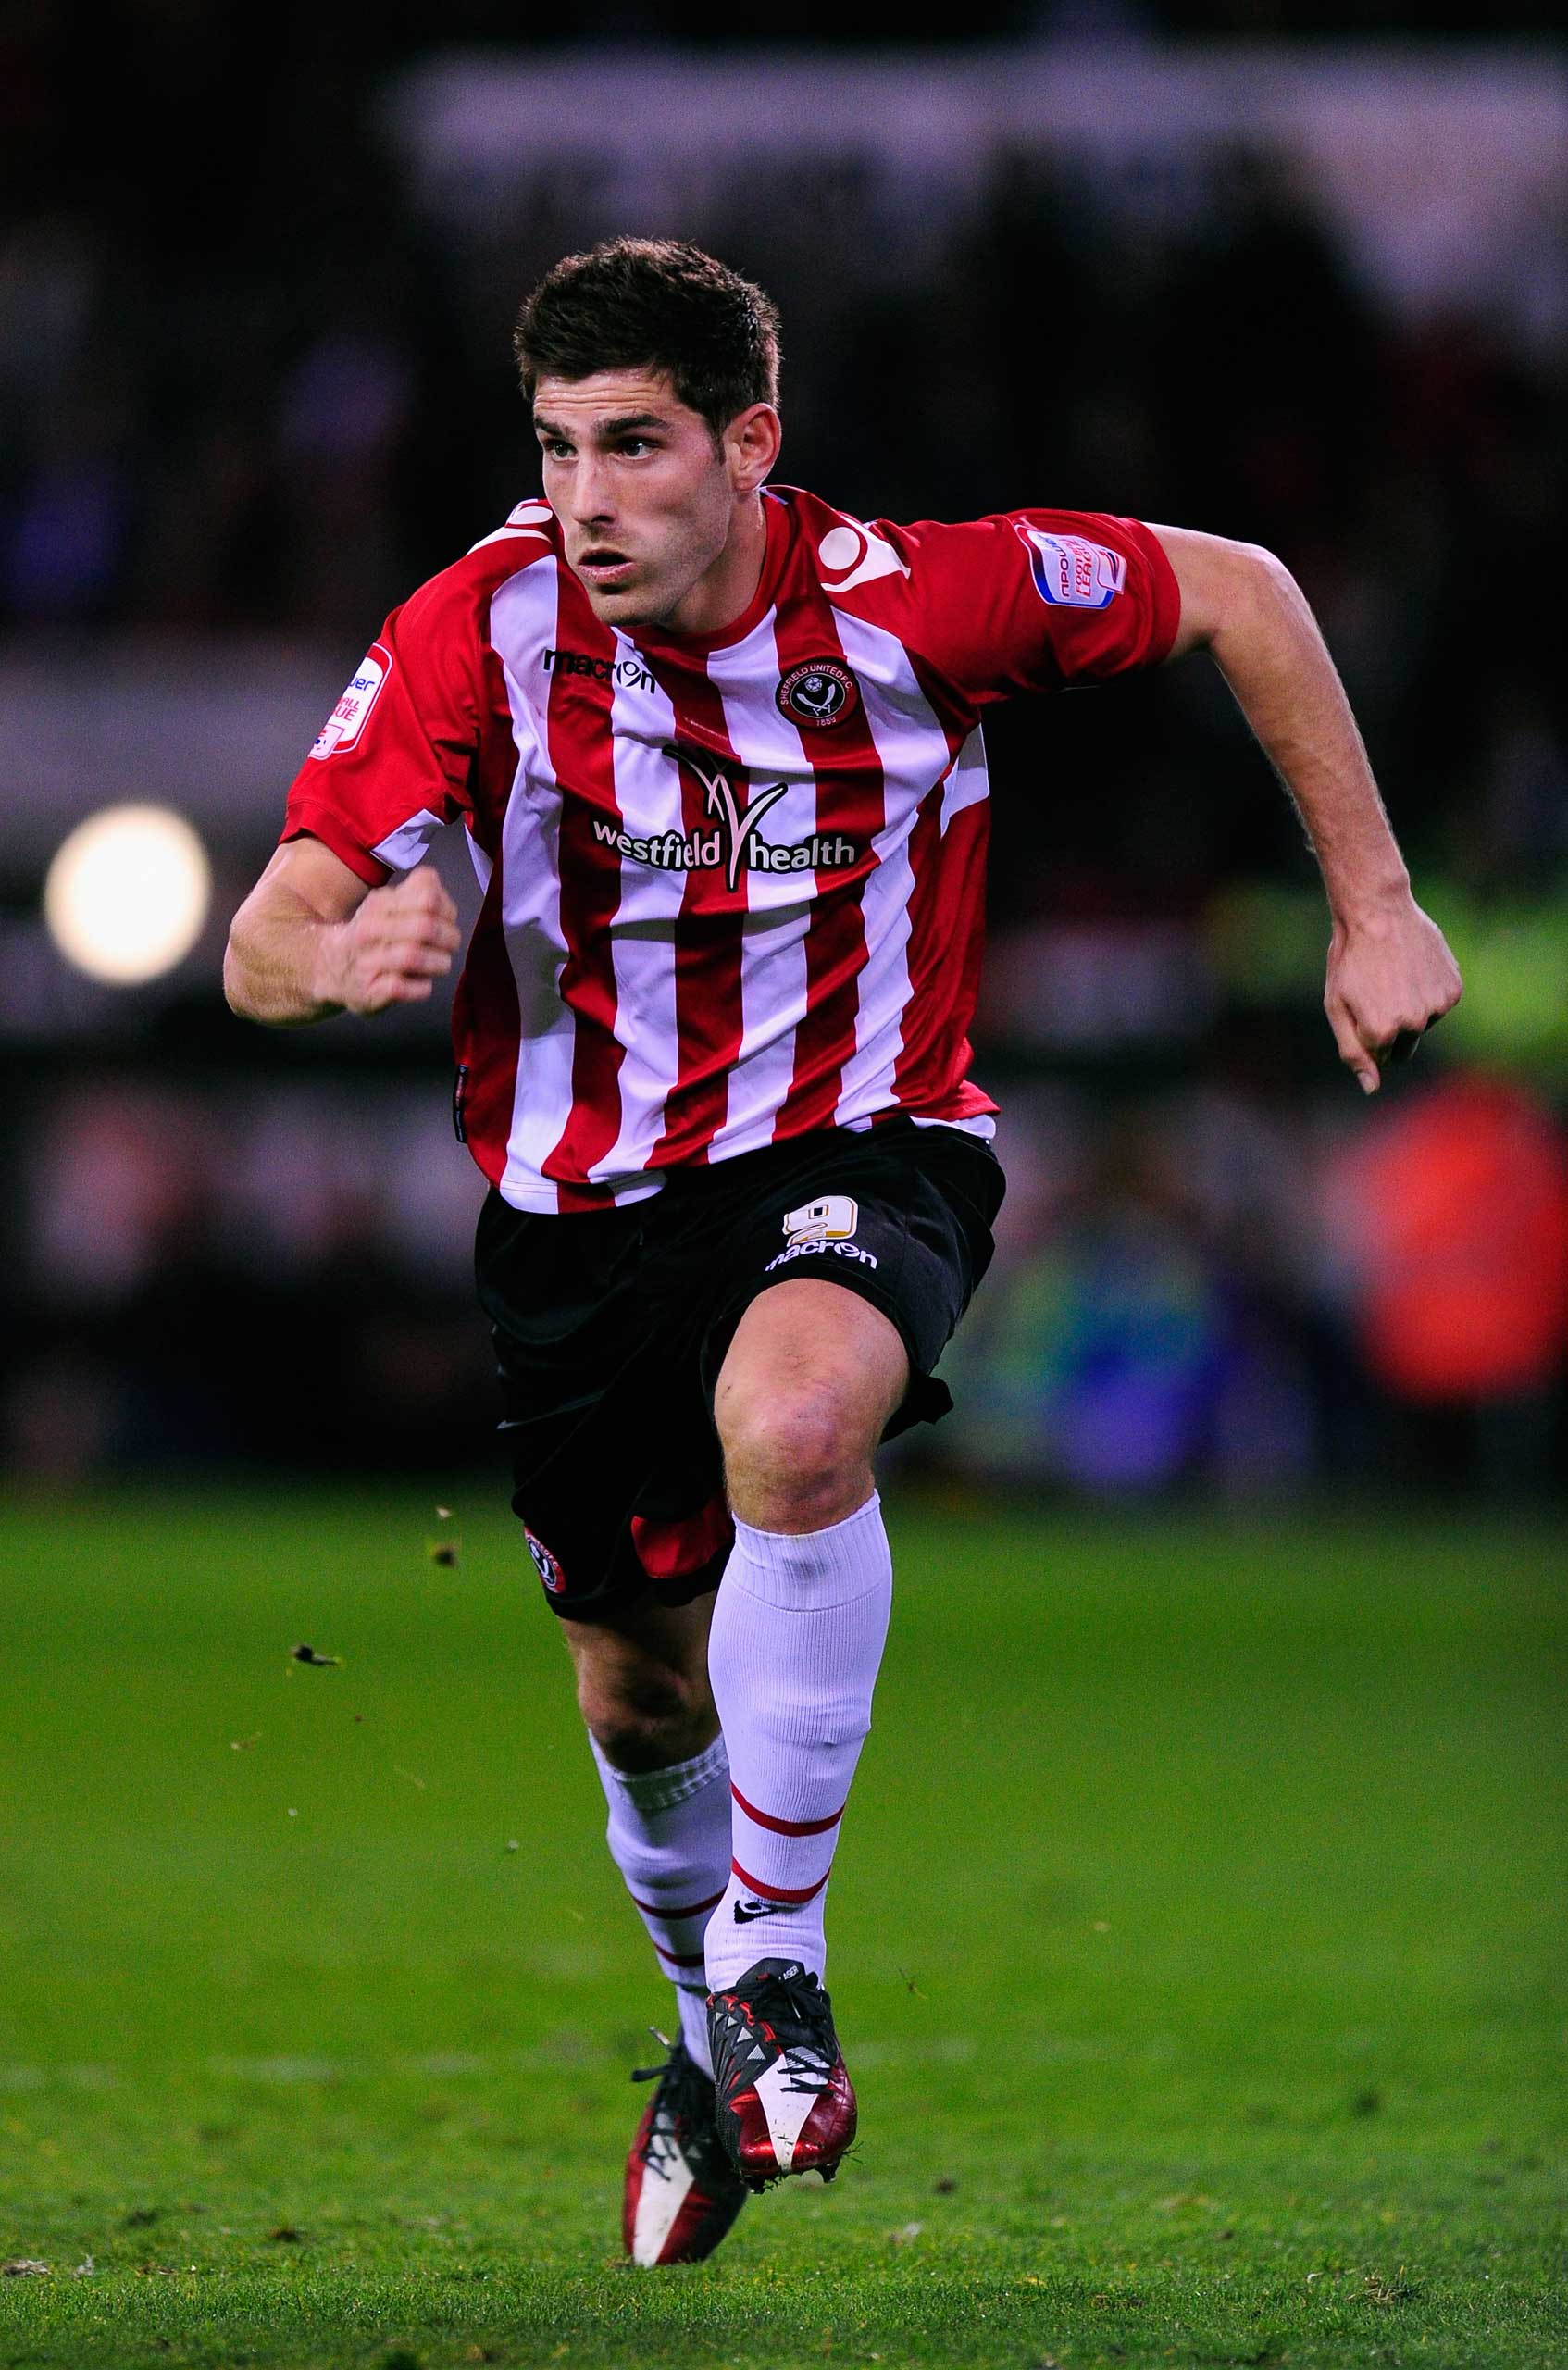 Ched Evans playing for Sheffield United in 2012.